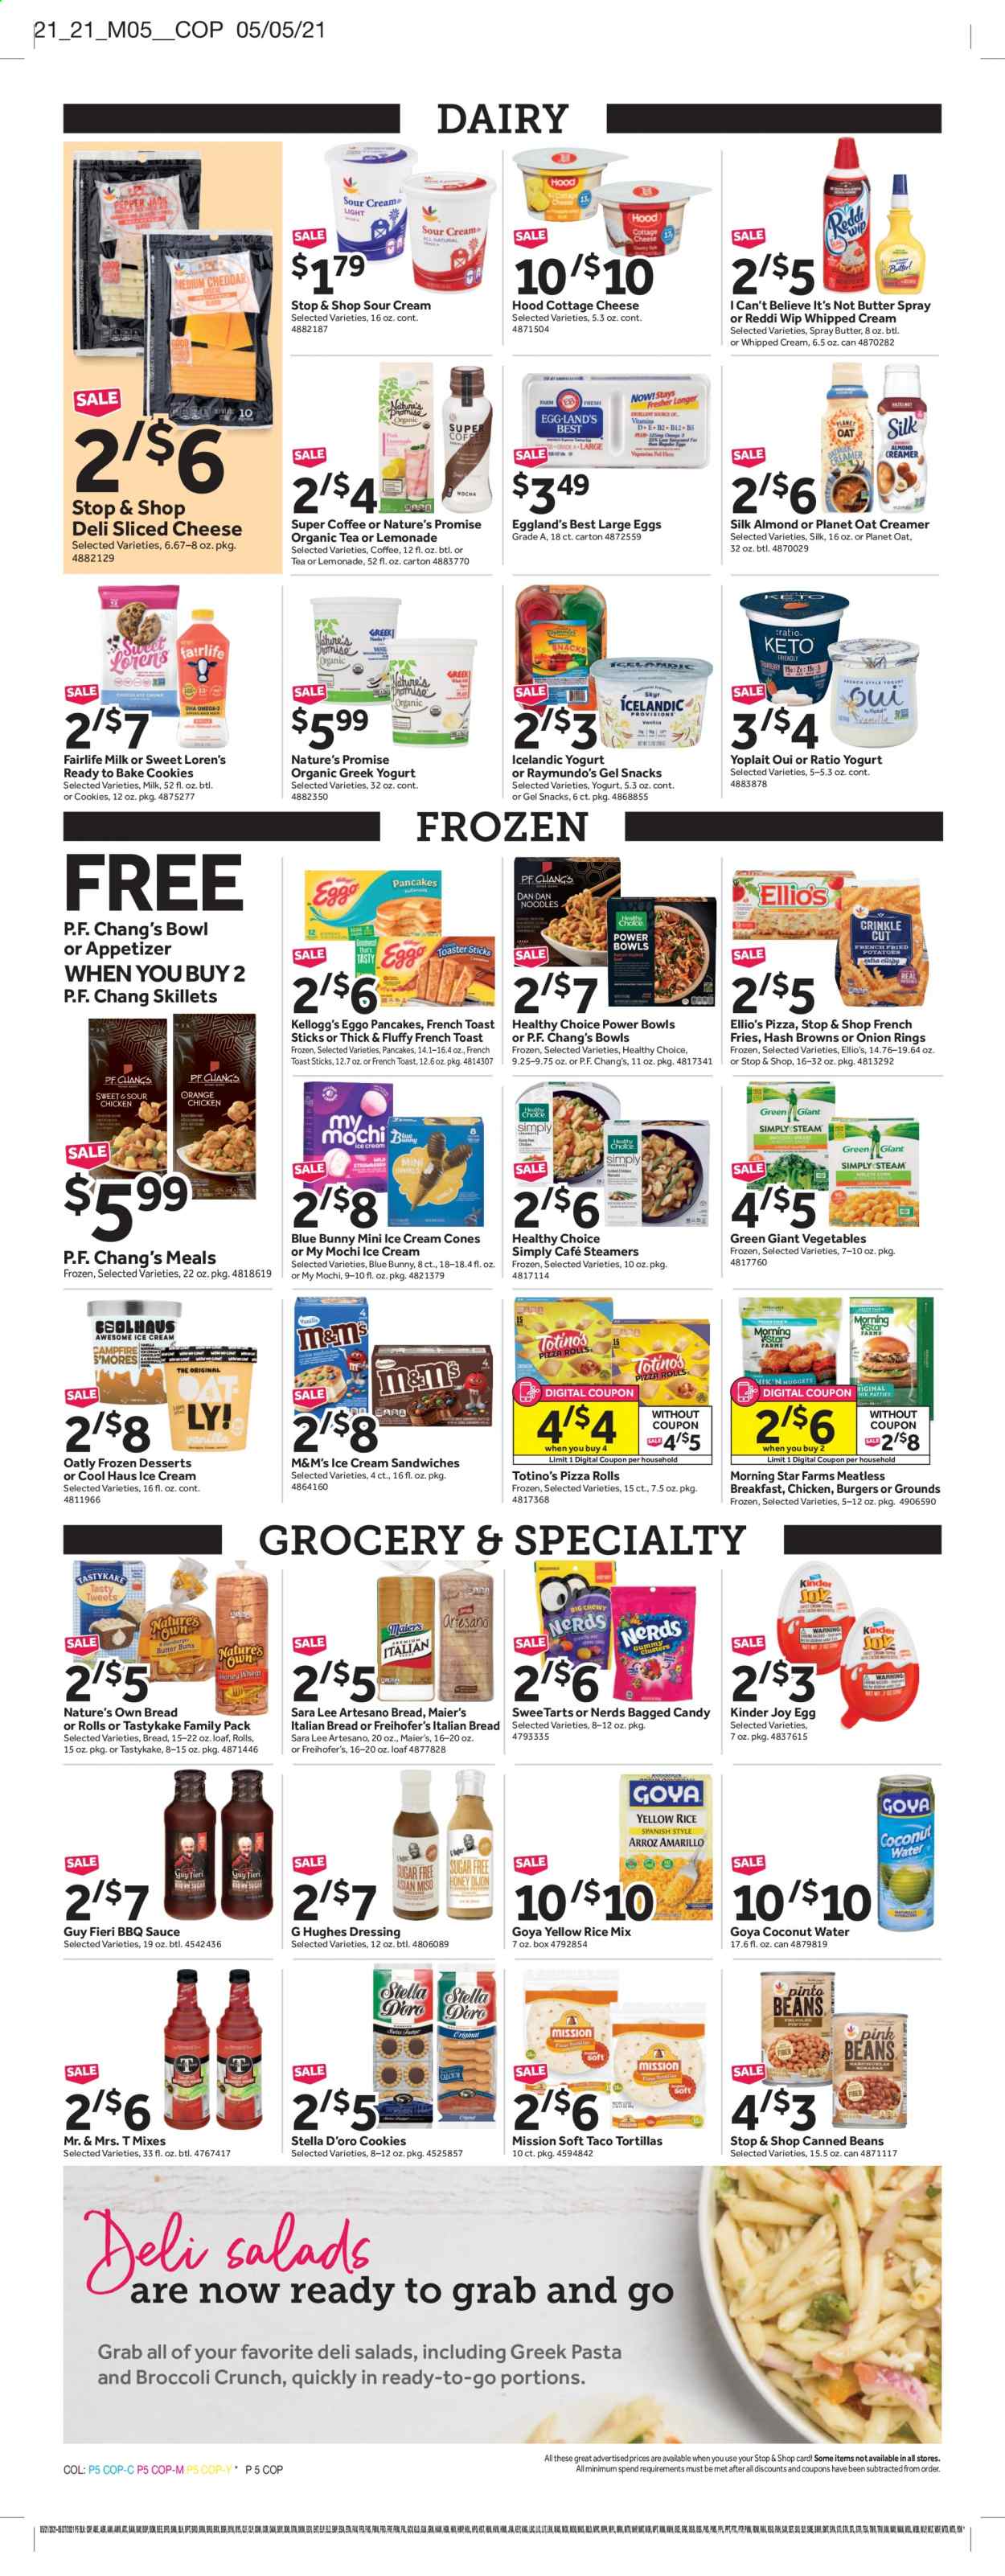 thumbnail - Stop & Shop Flyer - 05/21/2021 - 05/27/2021 - Sales products - tortillas, pizza rolls, Nature’s Promise, Sara Lee, beans, hamburger, pizza, onion rings, pasta, sauce, pancakes, Healthy Choice, ham, cottage cheese, sliced cheese, greek yoghurt, yoghurt, Yoplait, milk, large eggs, butter, I Can't Believe It's Not Butter, sour cream, whipped cream, creamer, ice cream, ice cream sandwich, Blue Bunny, hash browns, potato fries, french fries, cookies, snack, Kinder Joy, M&M's, Kellogg's, oats, Goya, BBQ sauce, dressing, lemonade, coconut water, tea, Nature's Own. Page 5.